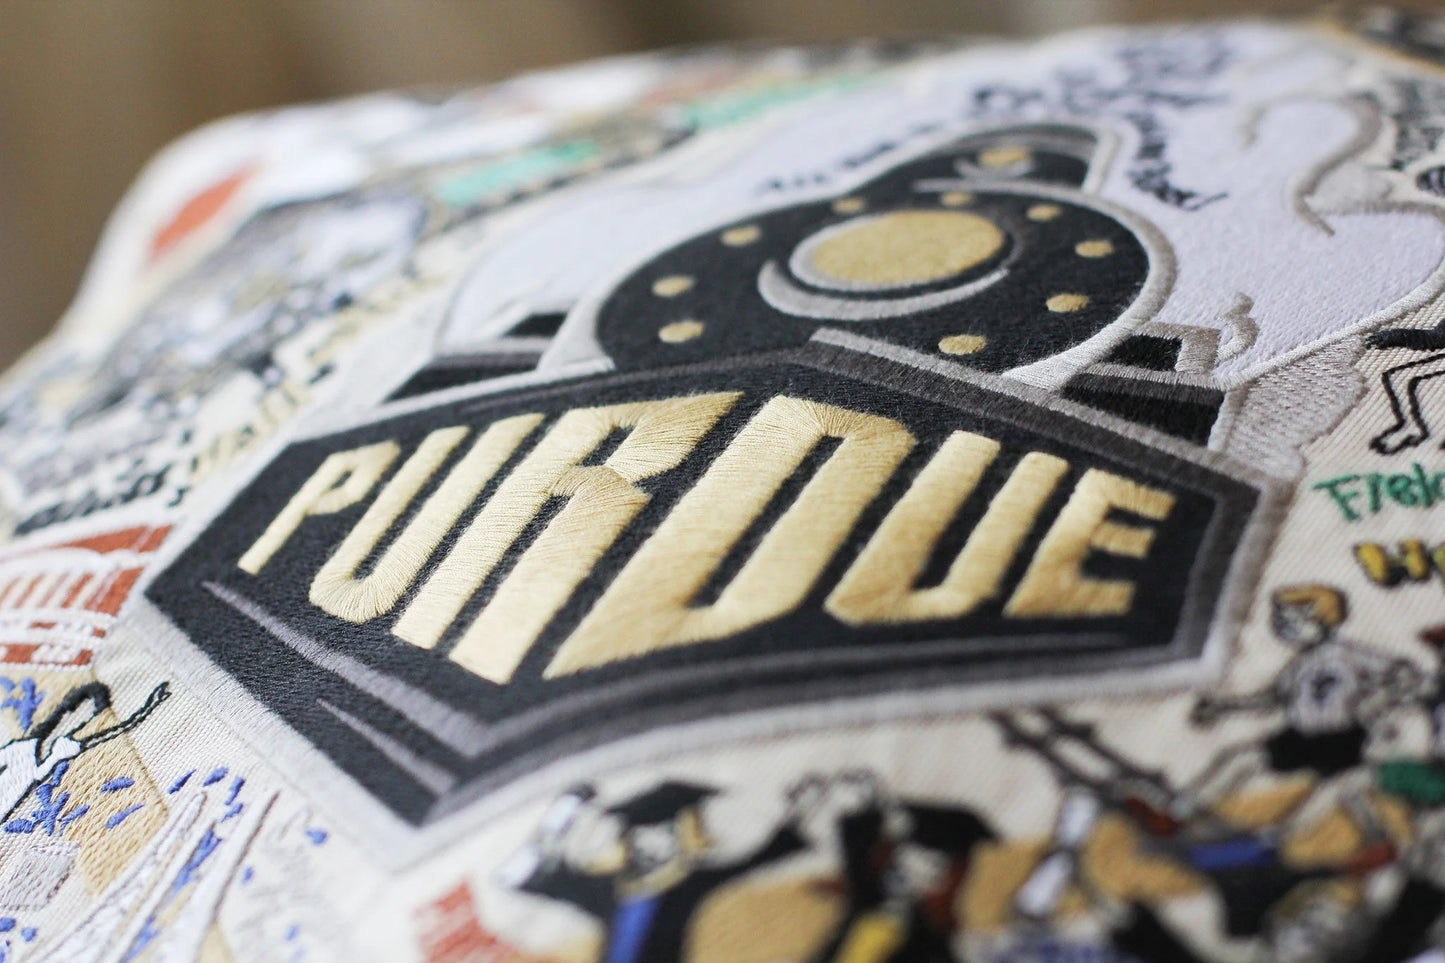 Purdue University Embroidered Pillow